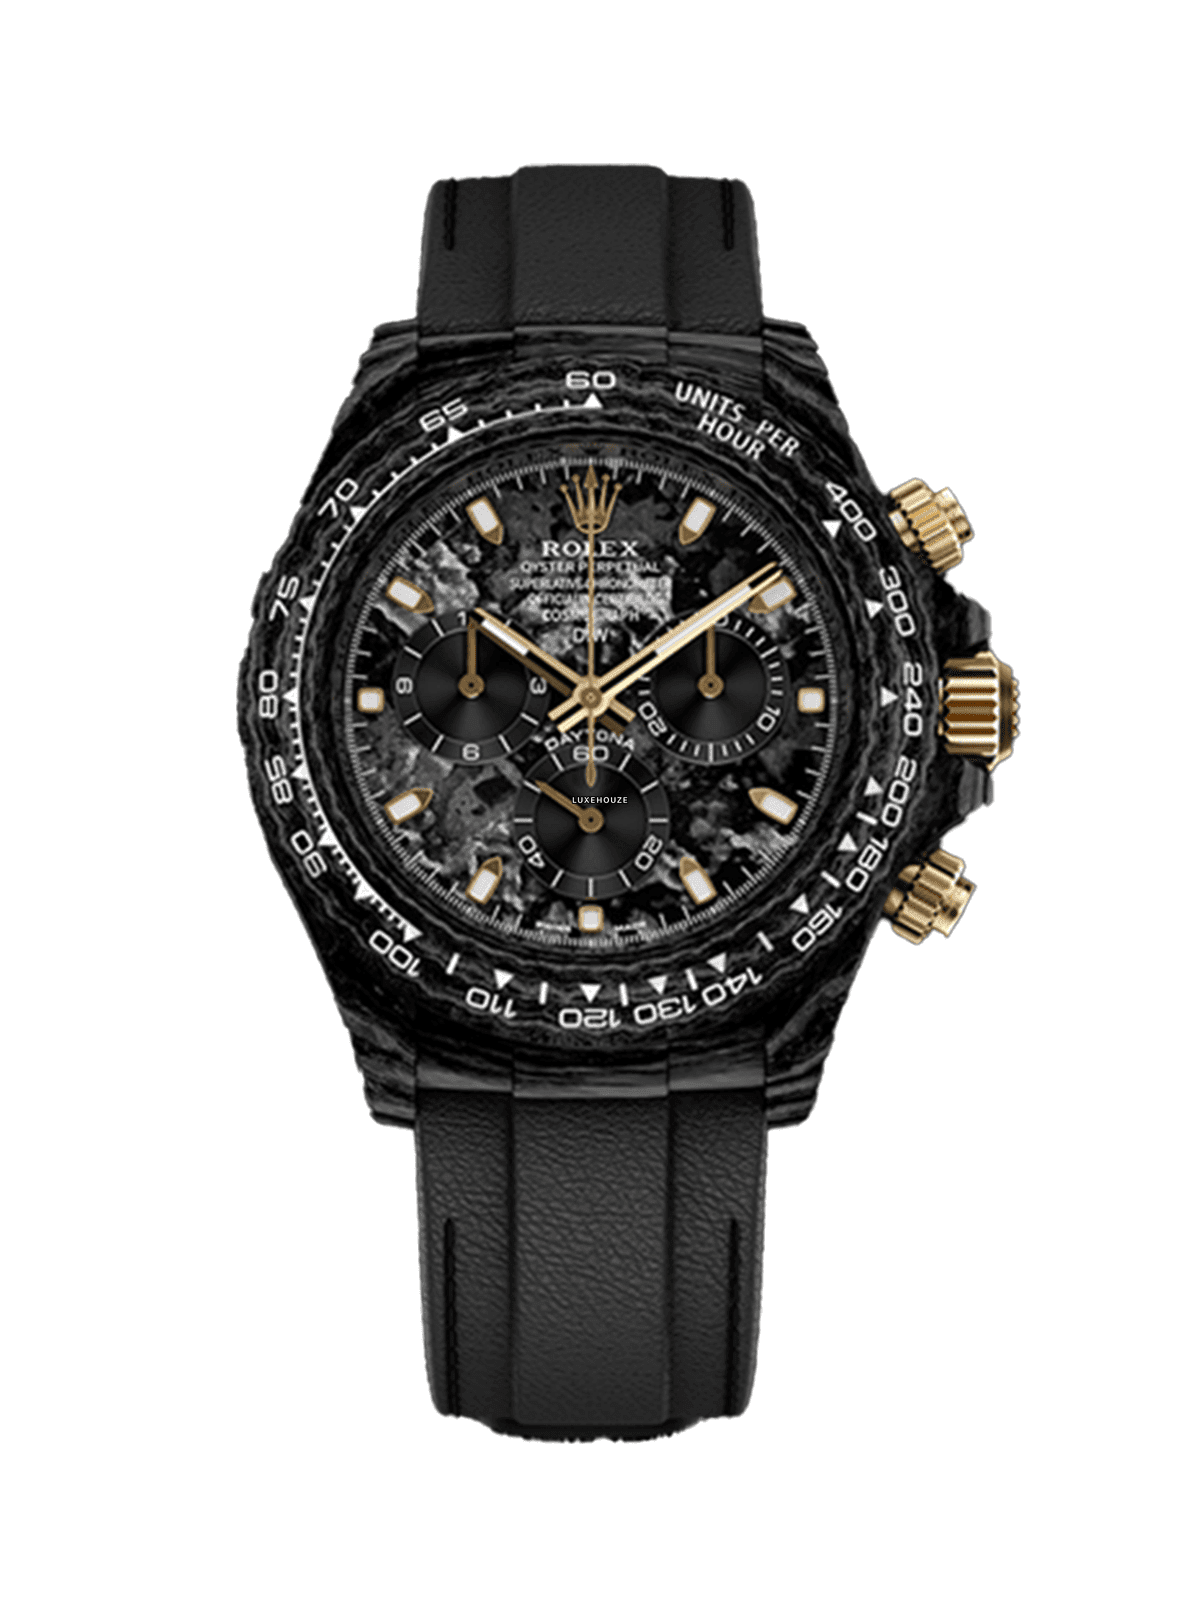 DiW Daytona Black and Gold Carbon Watches DiW 